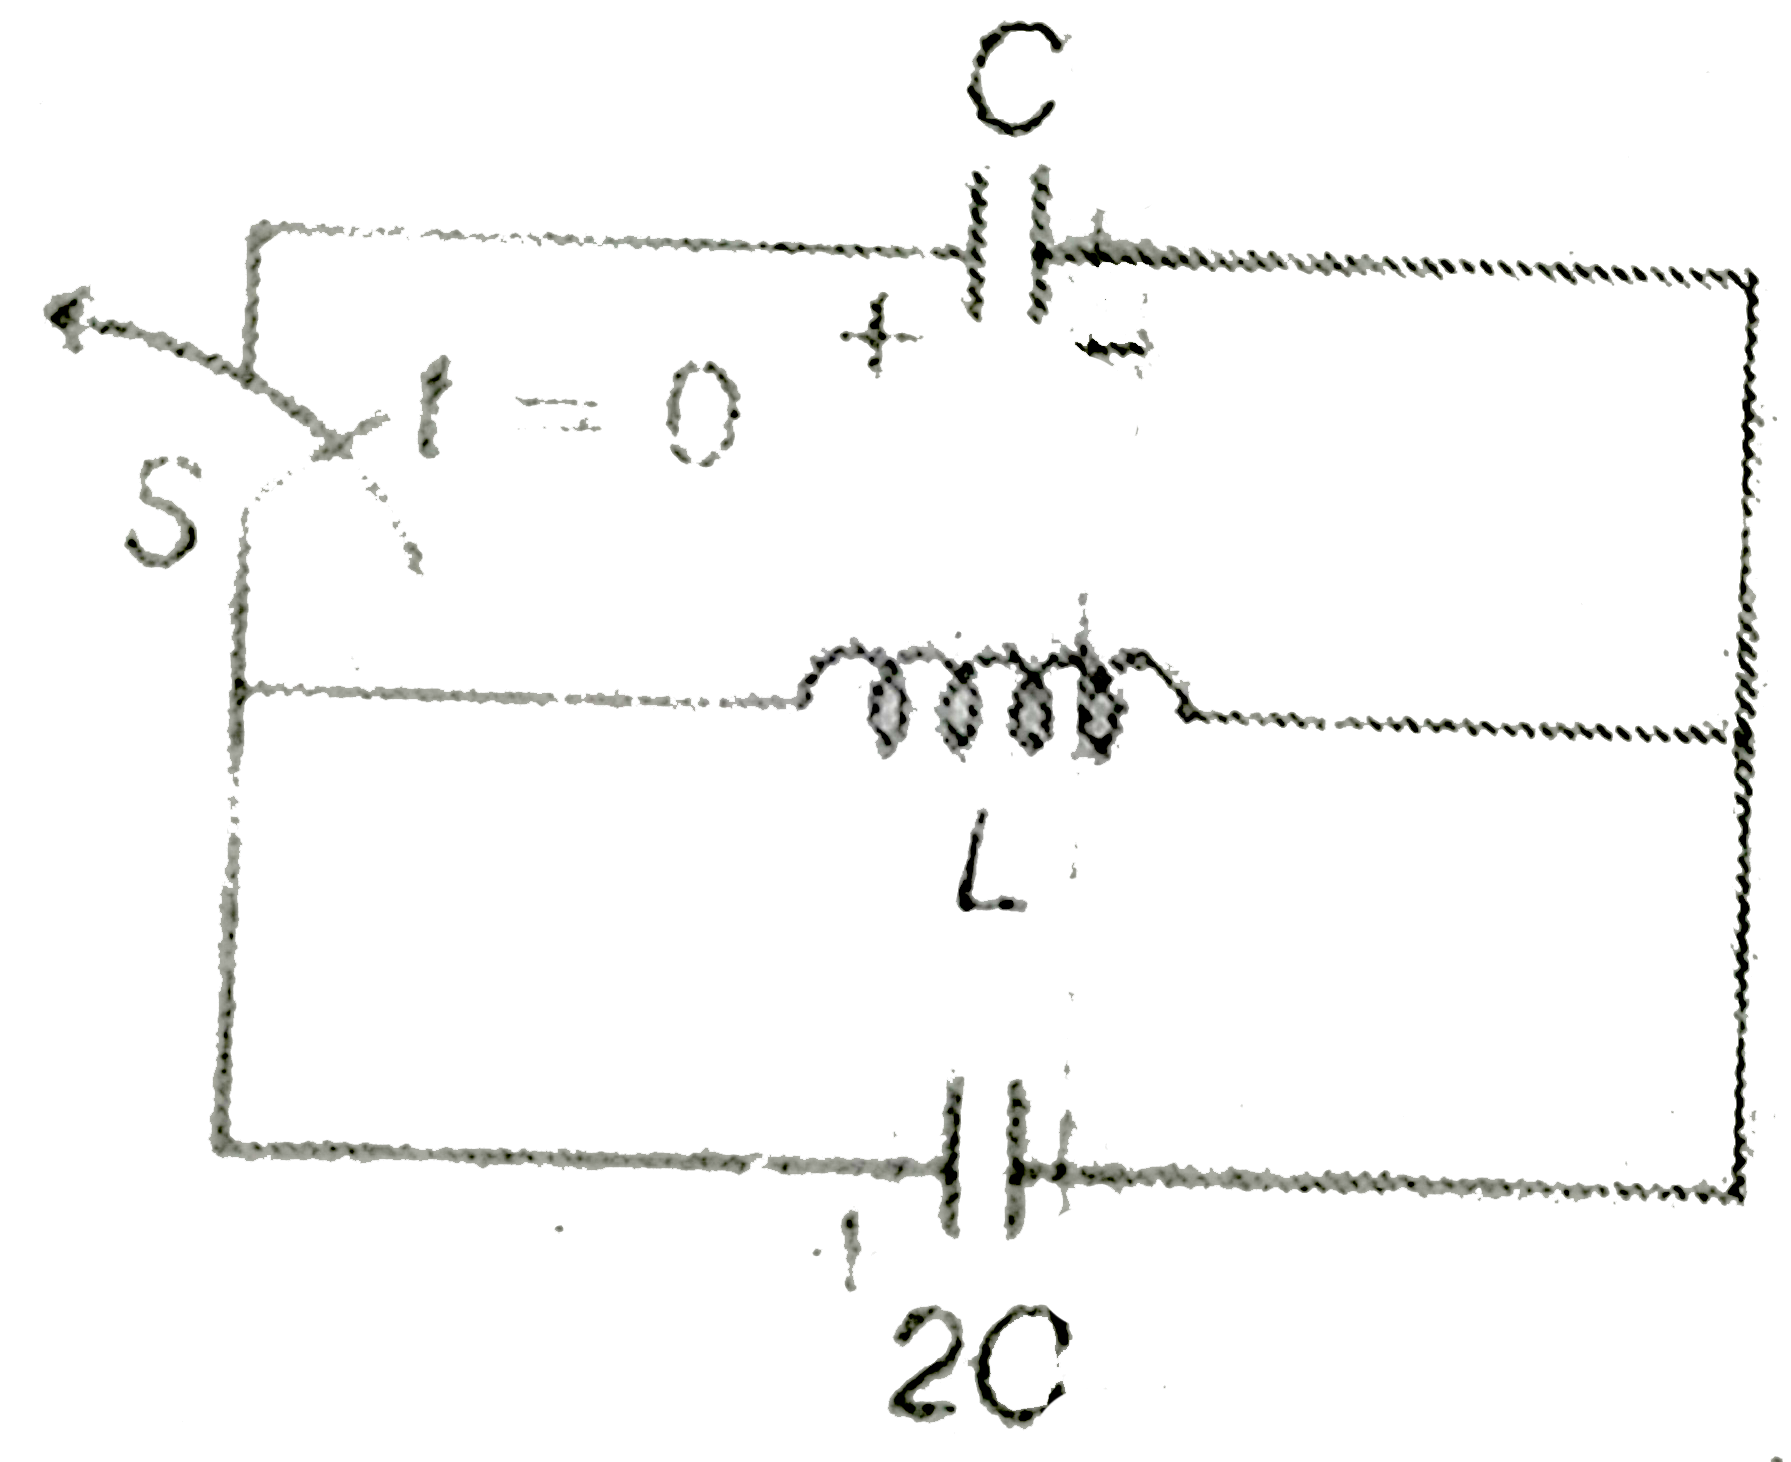 In the given LC circuit,if initially capacitor C has charge Q on it and 2C has charge 2Q. The polar ar as shown in figure. Then after closing switch S and t=0